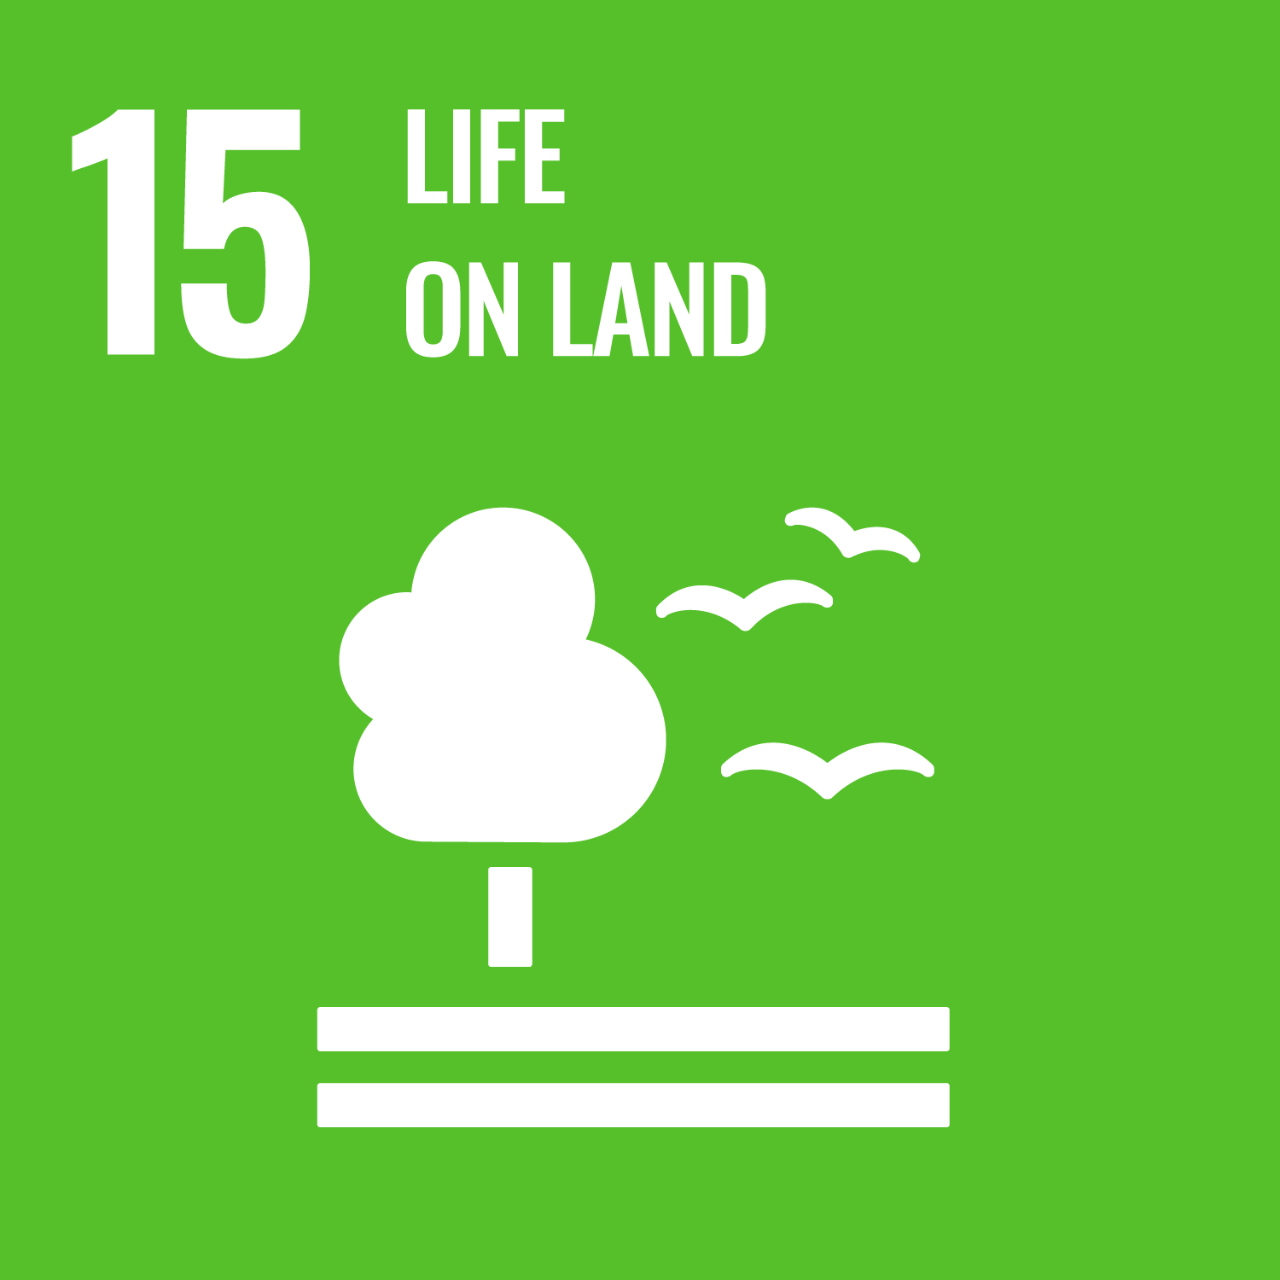 Green icon with graphic of tree and birds to represent UNSDG Goal 15: Life on Land.